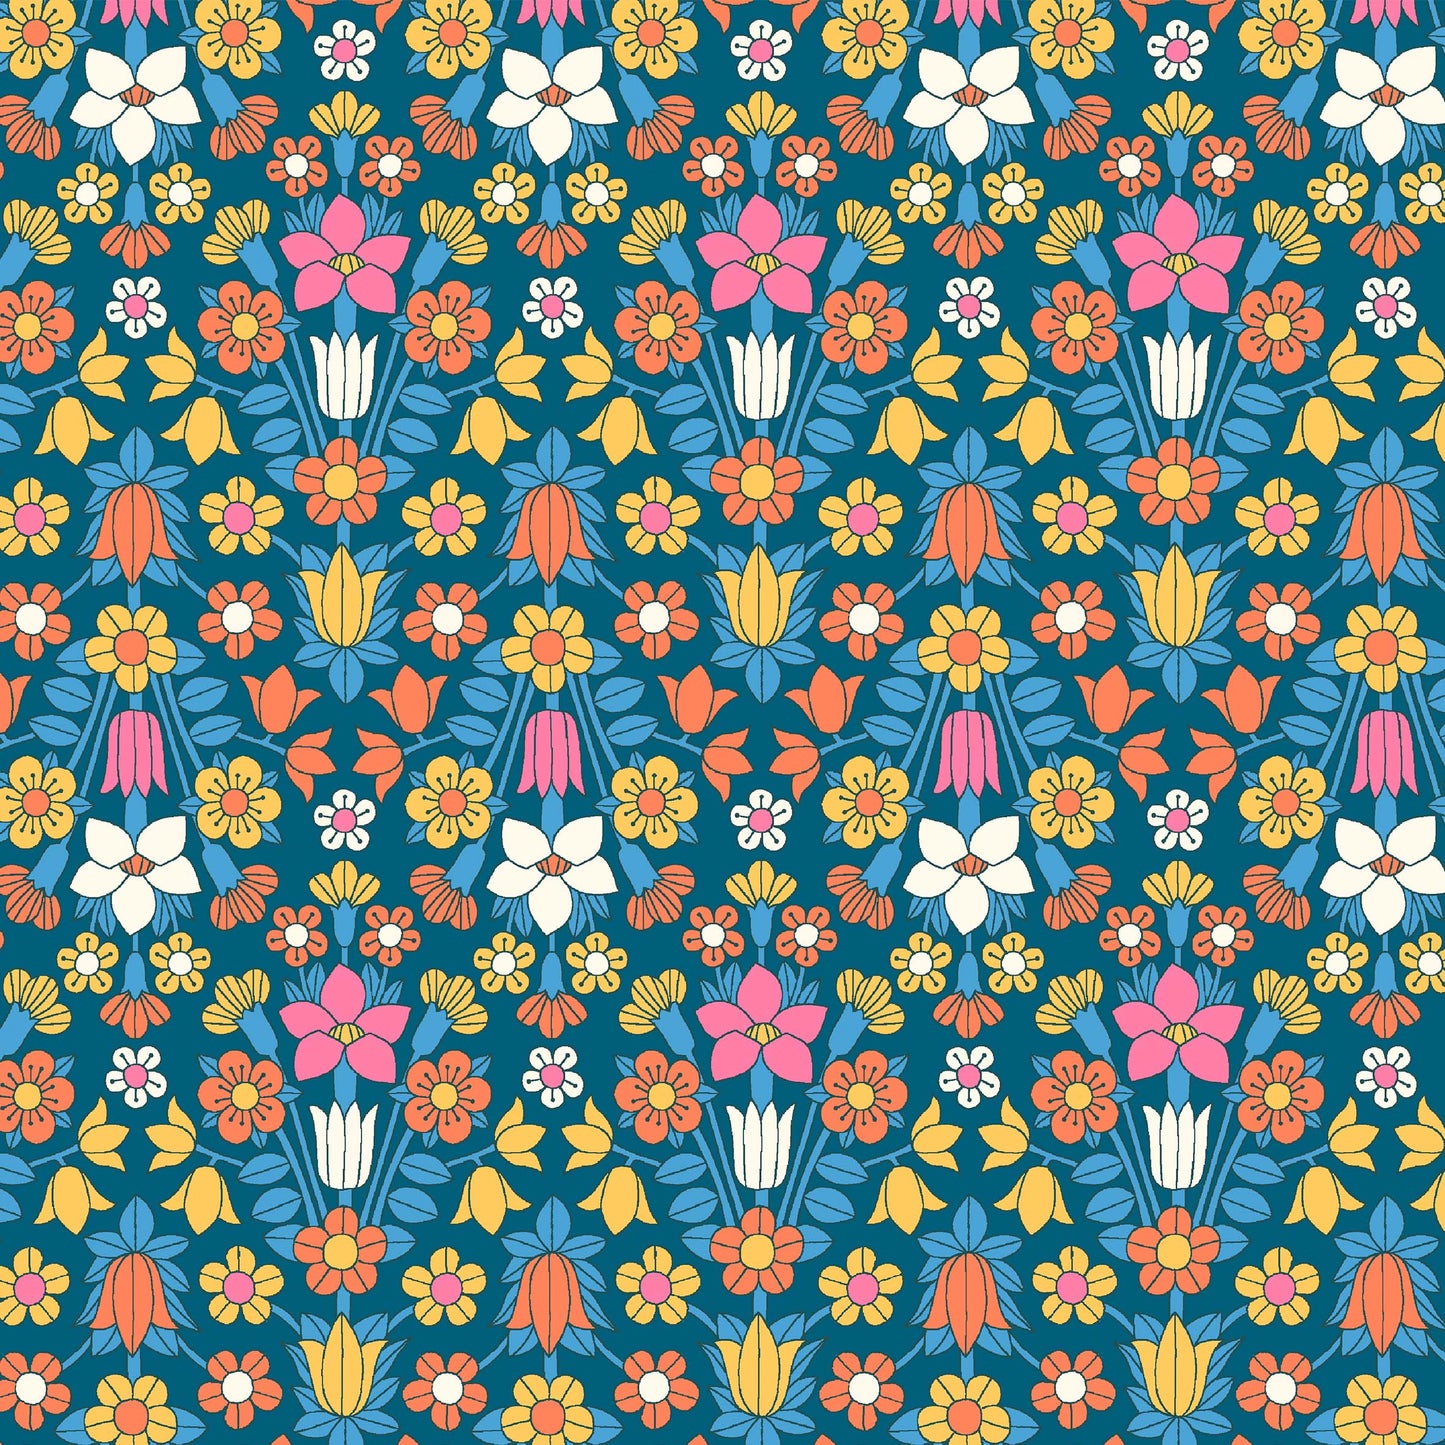 Hampstead Meadow Daisy Flower Multi - The Flower Show Midsummer Collection - Liberty Cotton Fabric ✂️ £10 pm *SALE